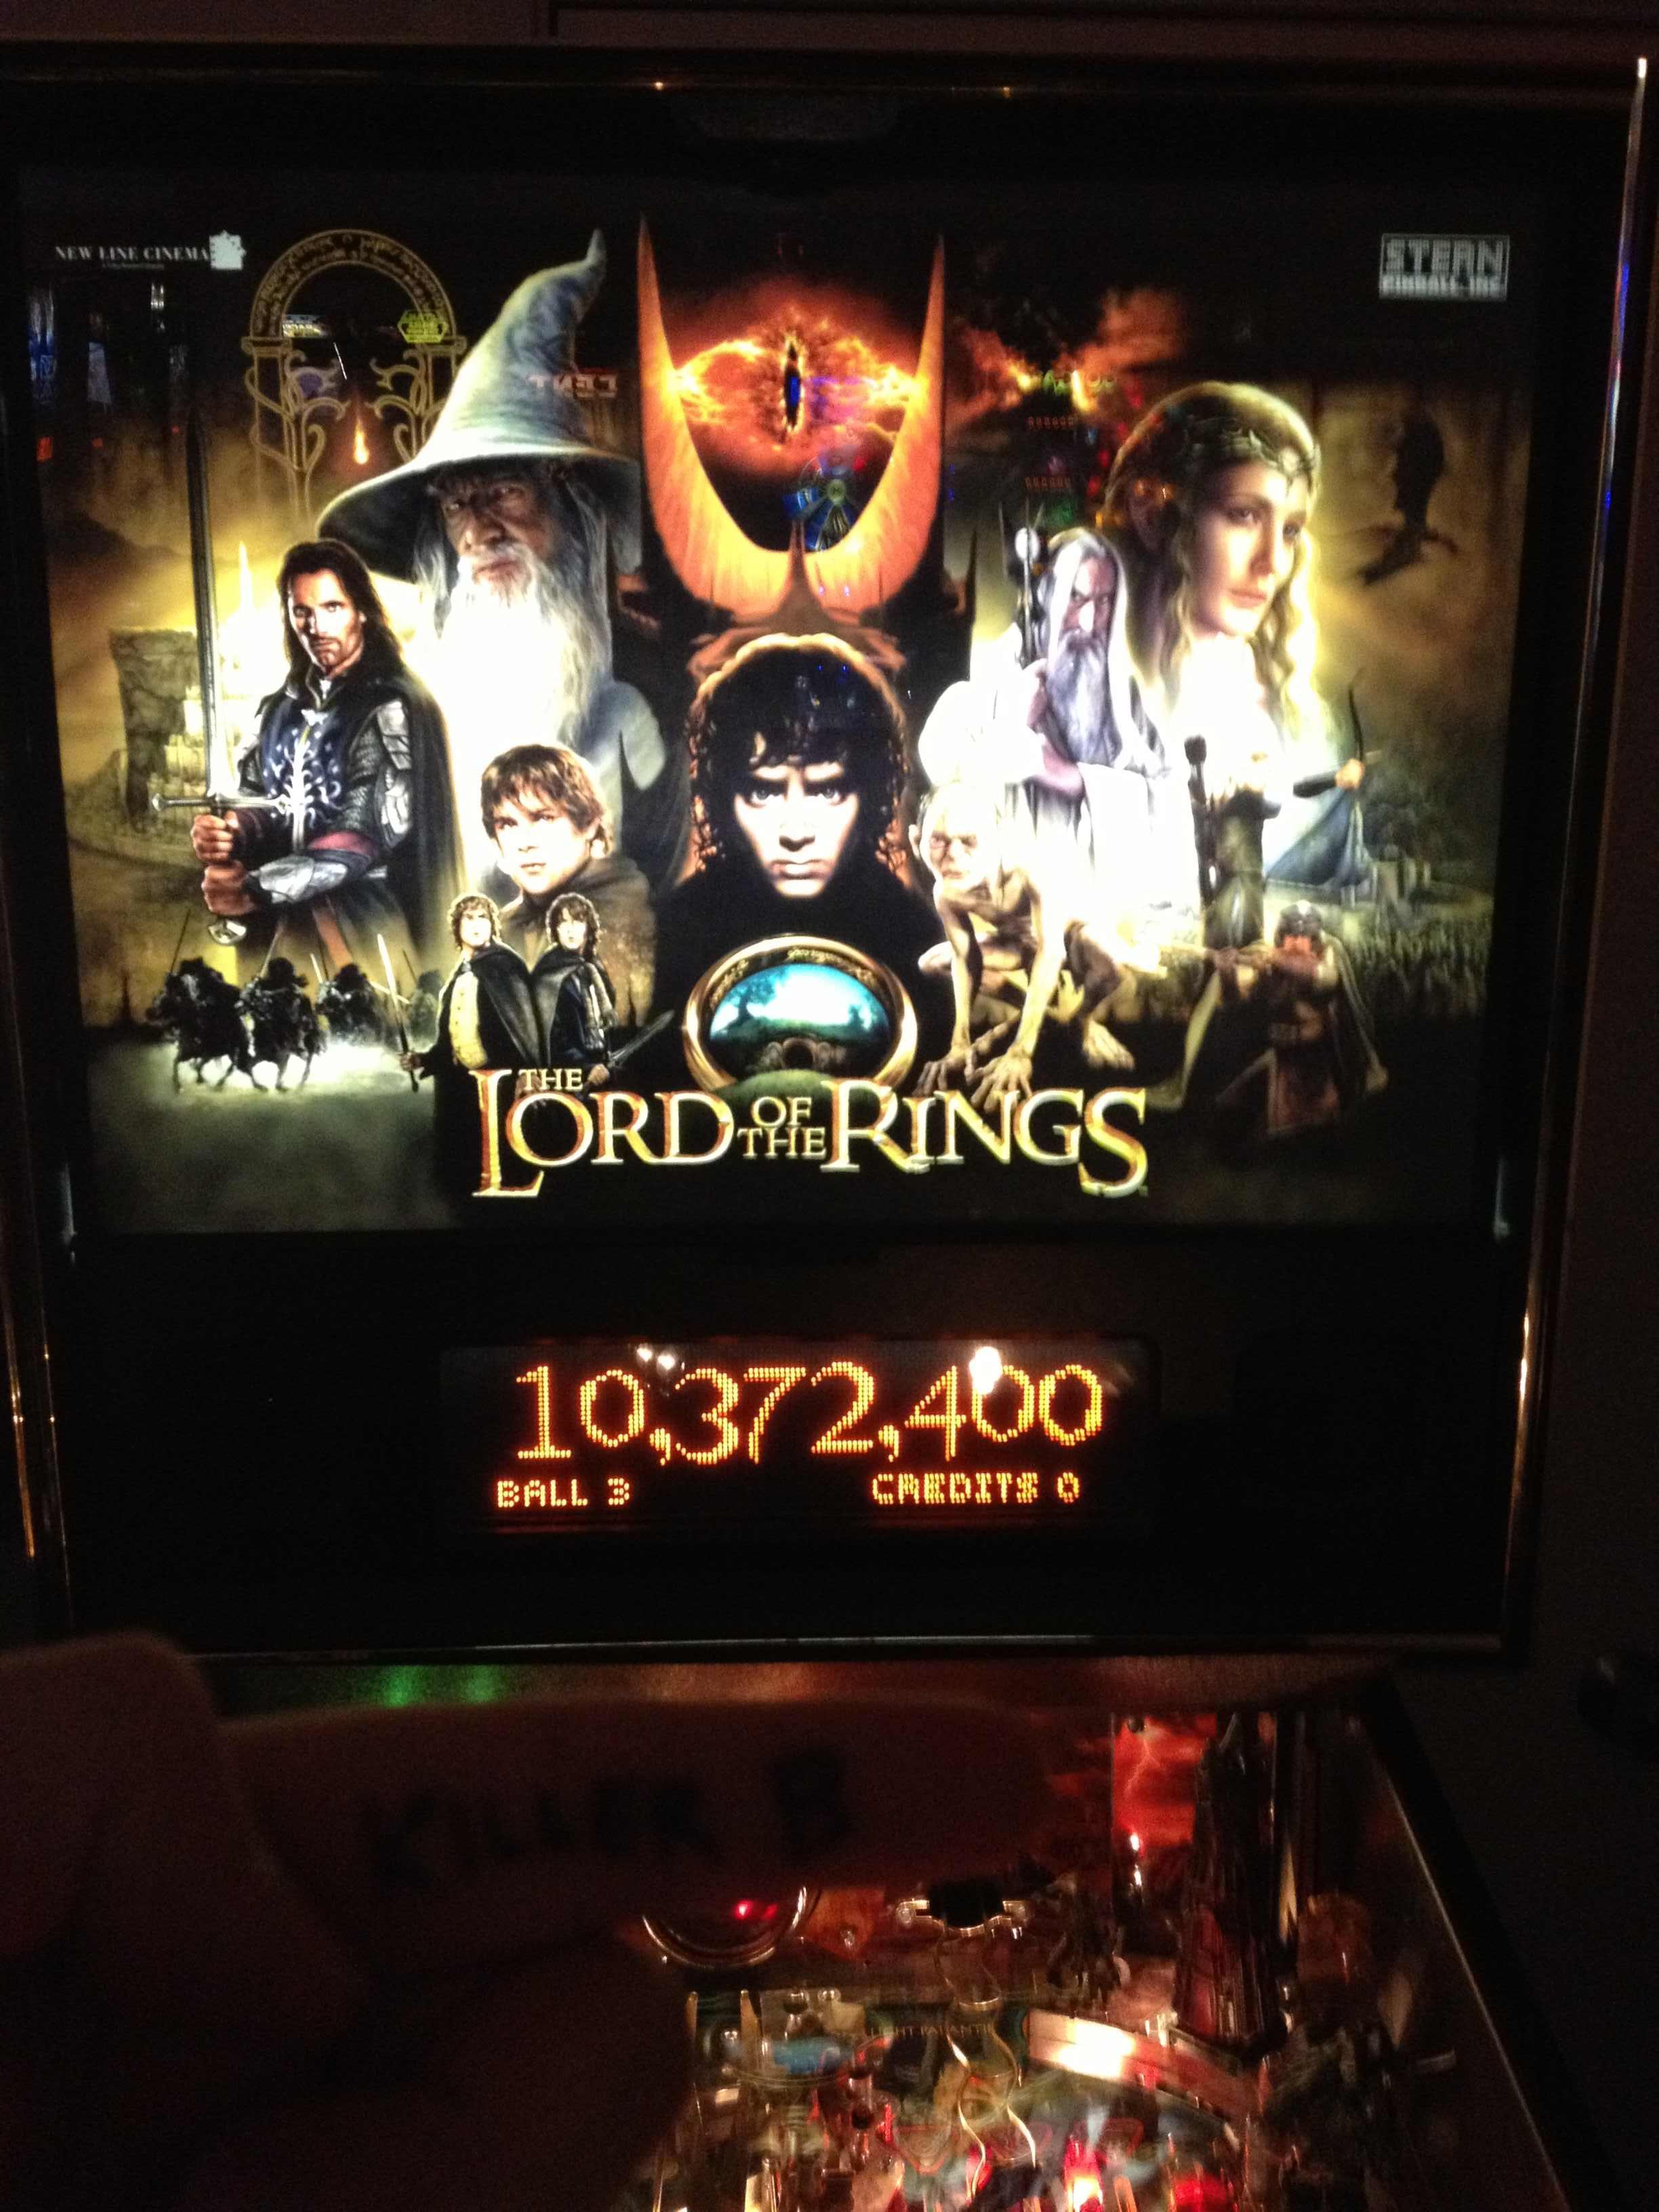 The Lord of the Rings 10,372,400 points